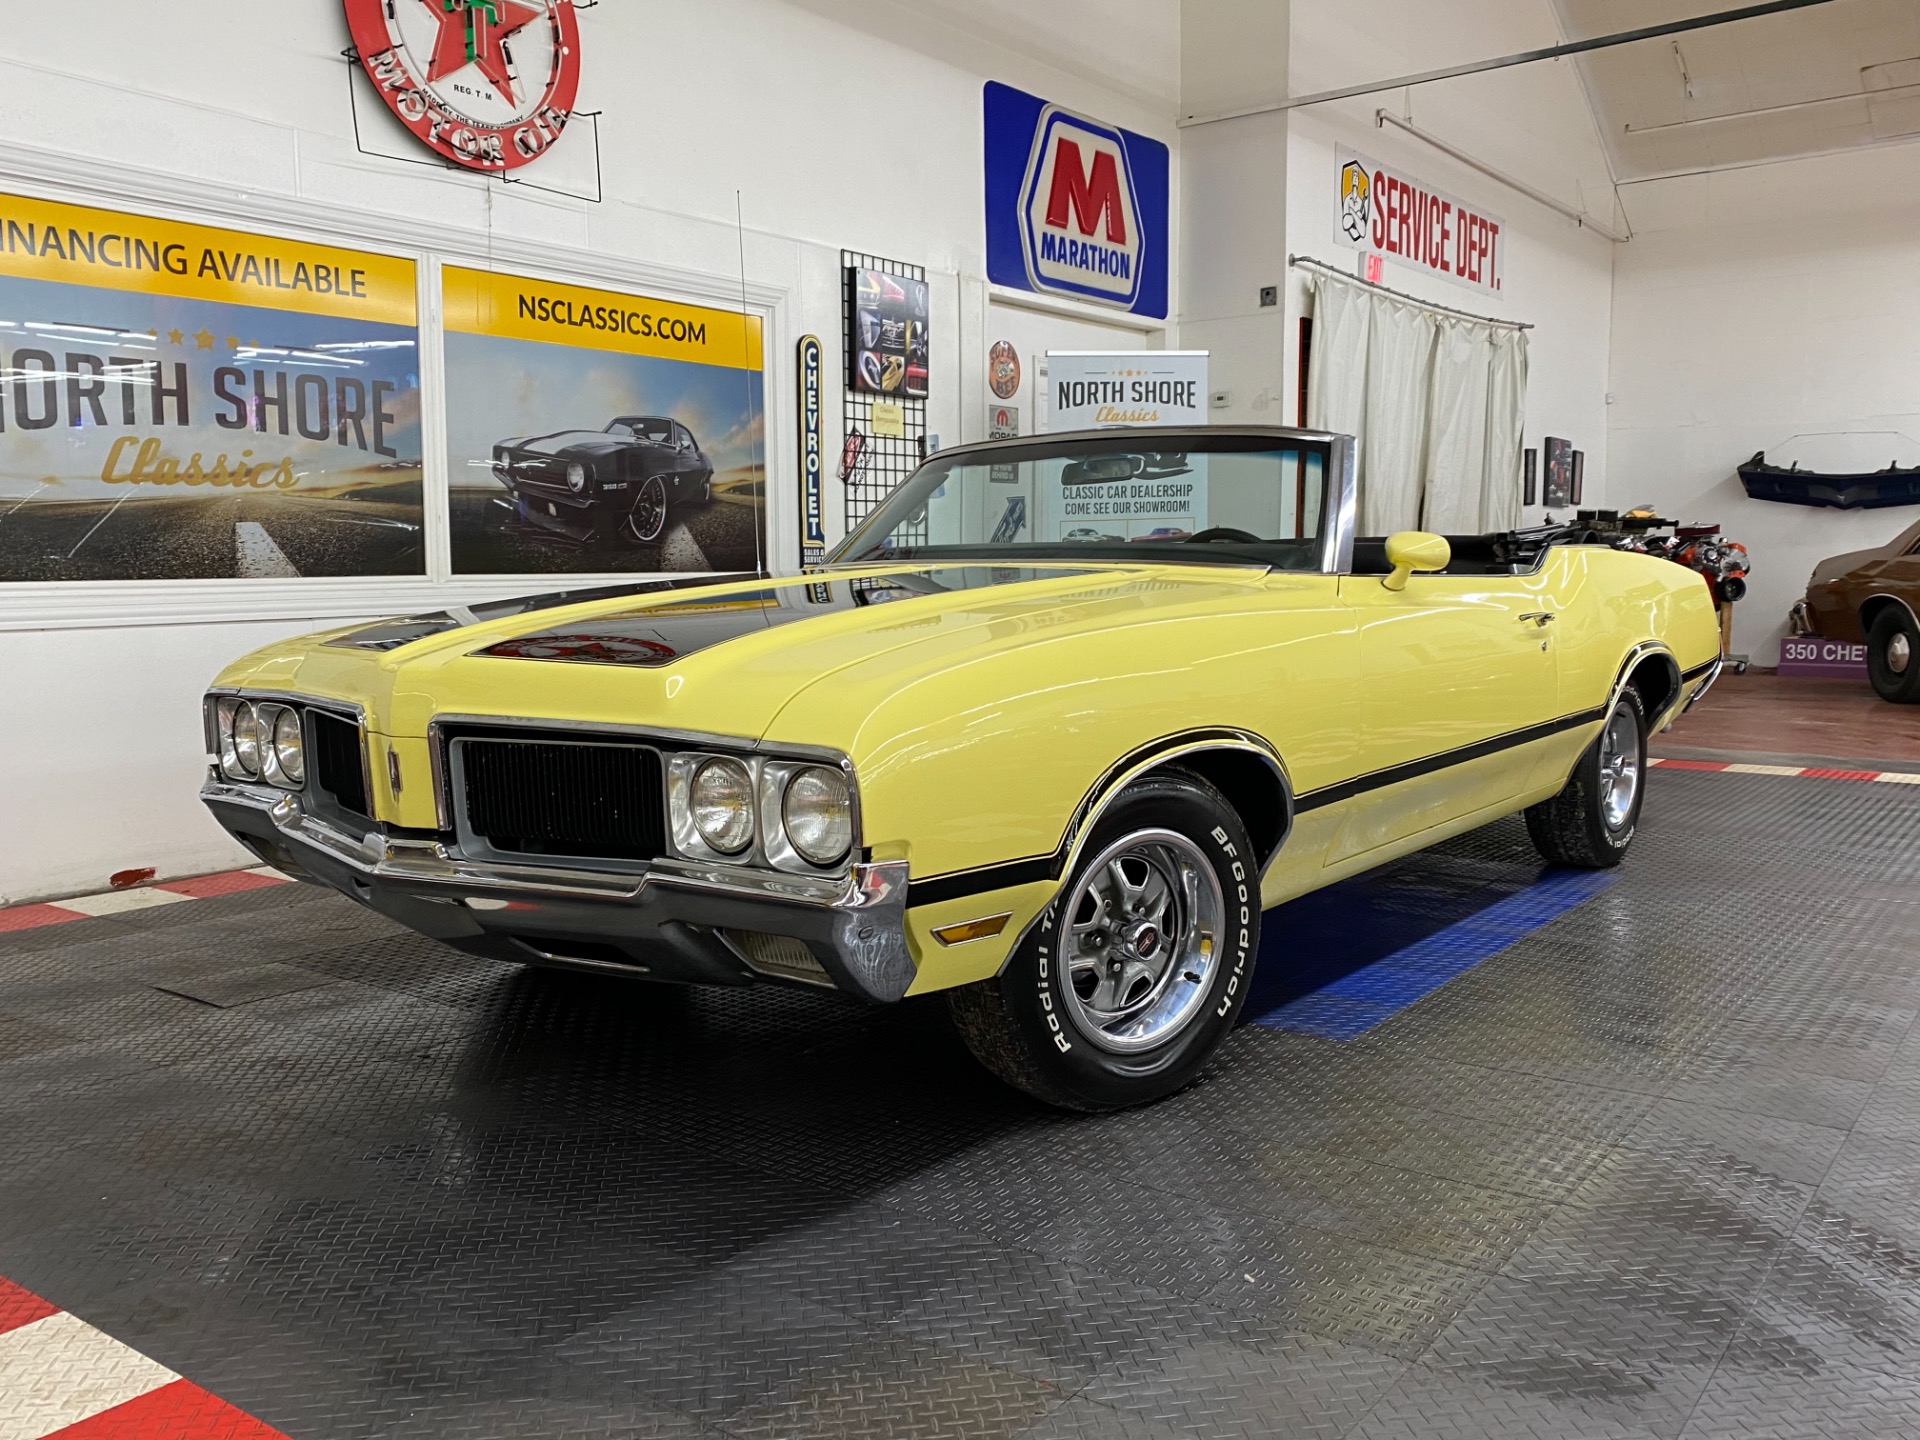 Oldsmobile Muscle Cars For Sale Cars On Line Com Classic Cars For Sale